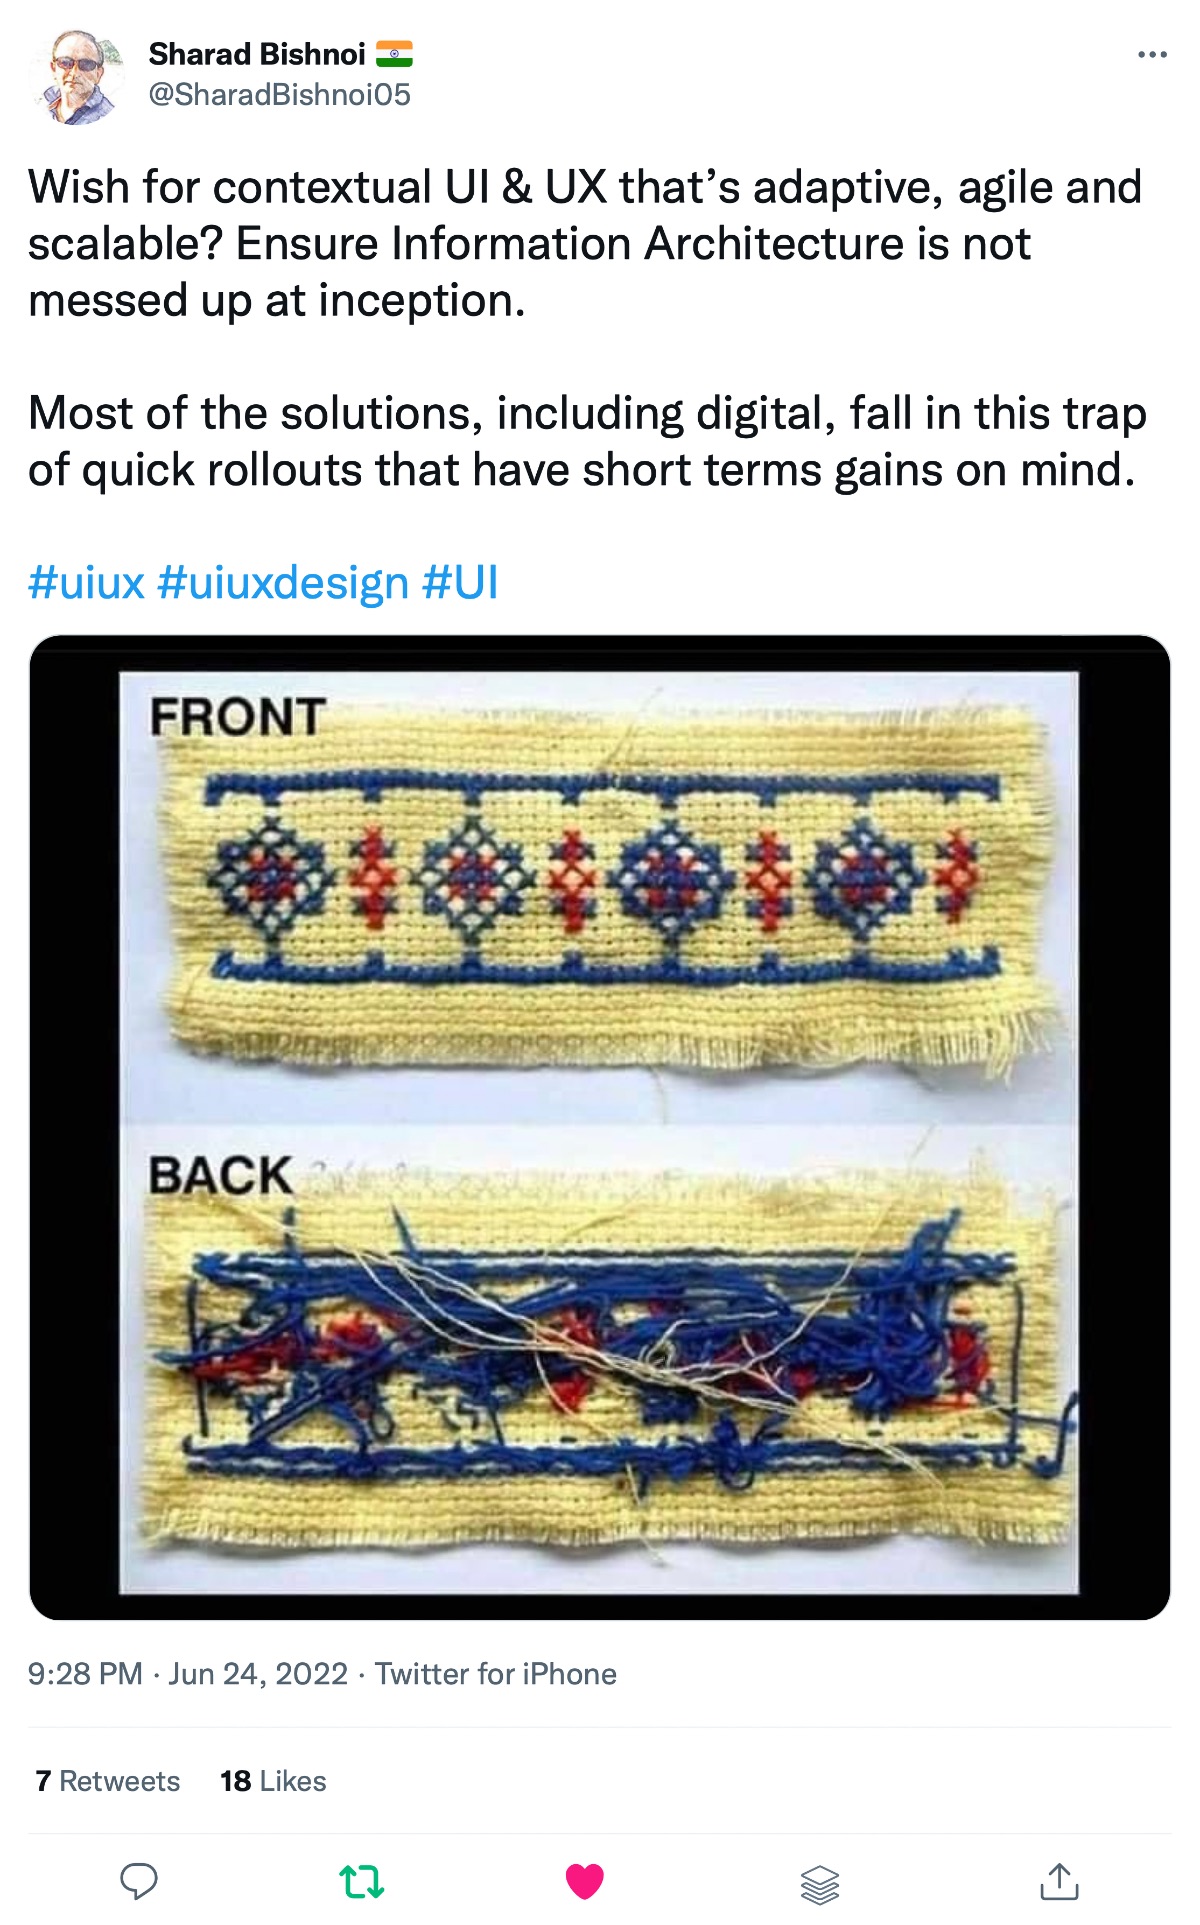 Tweet from @SharadBishnoi05 that says: 'Wish for contextual UI & UX that’s adaptive, agile and scalable? Ensure Information Architecture is not messed up at inception. Most of the solutions, including digital, fall in this trap of quick rollouts that have short terms gains on mind.'